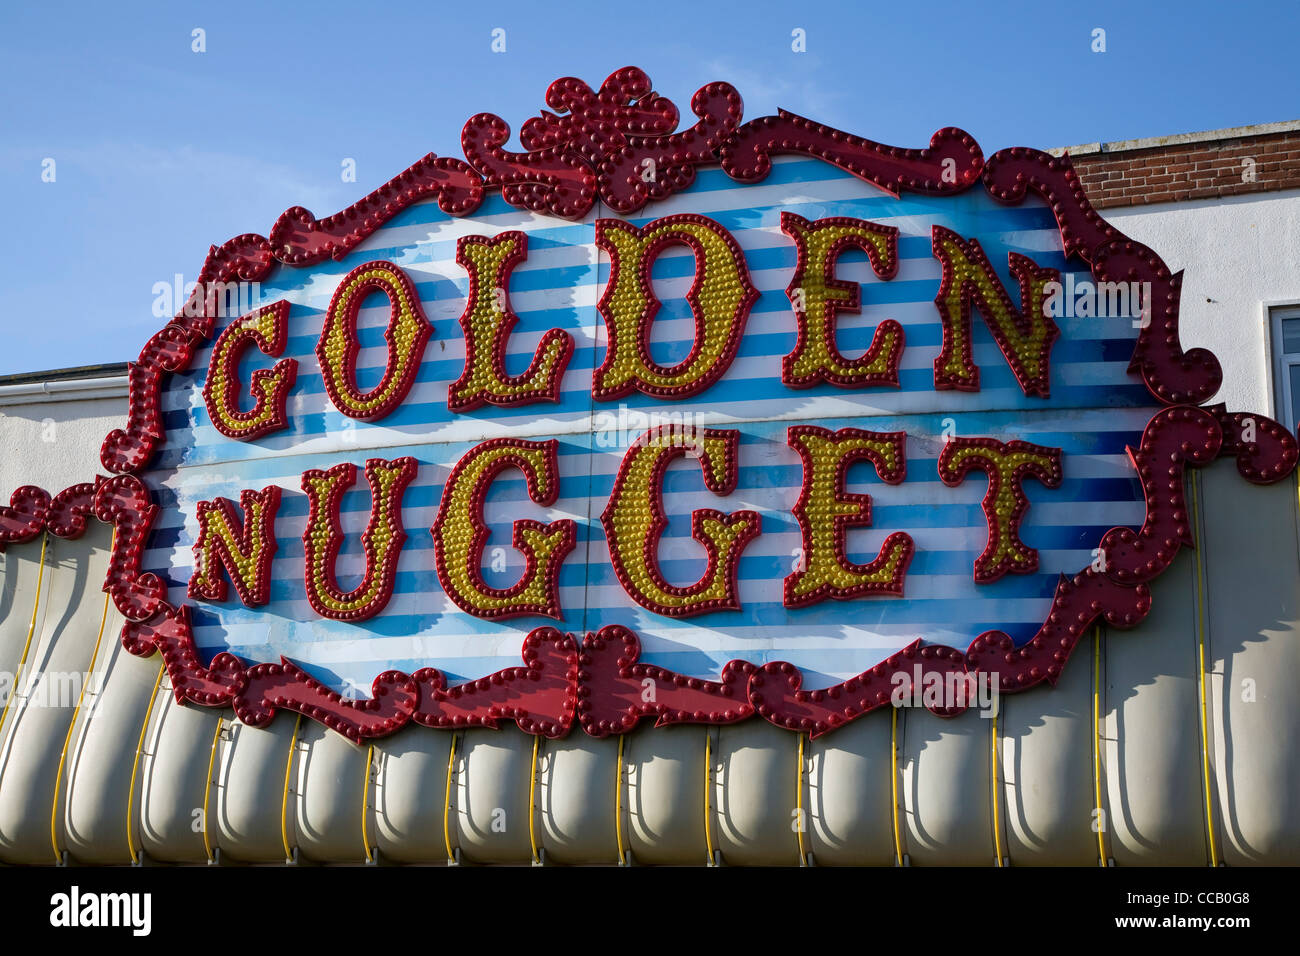 Golden Nugget signer Attraction Great Yarmouth Banque D'Images